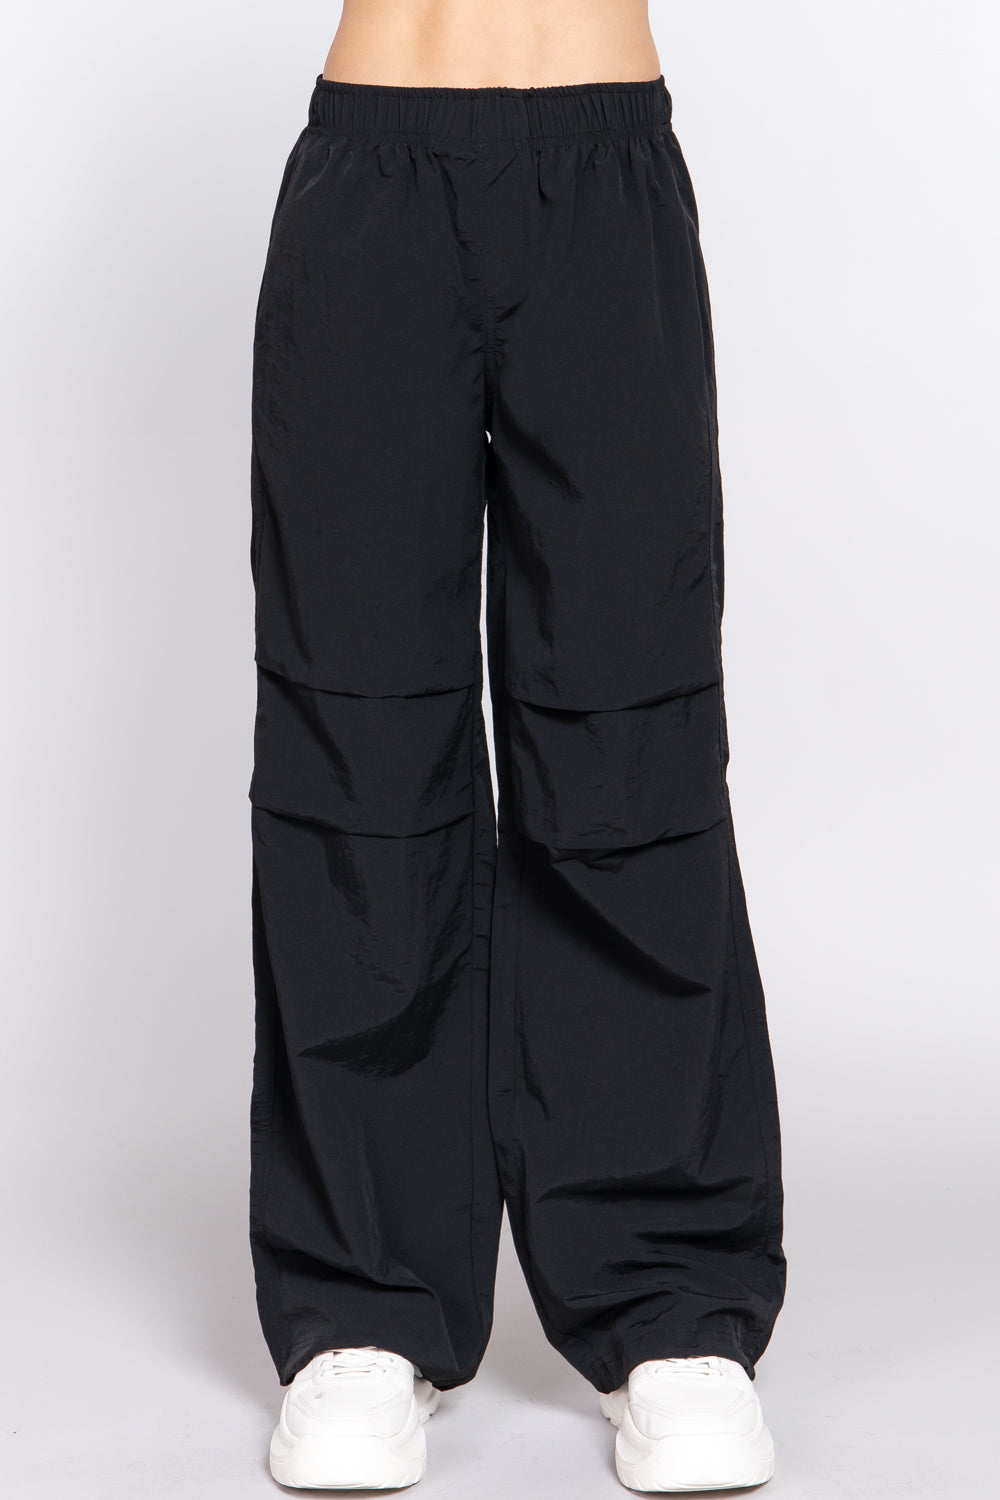 Black - Waist Elastic Parachute Pants - 3 colors to choose from - womens pants at TFC&H Co.